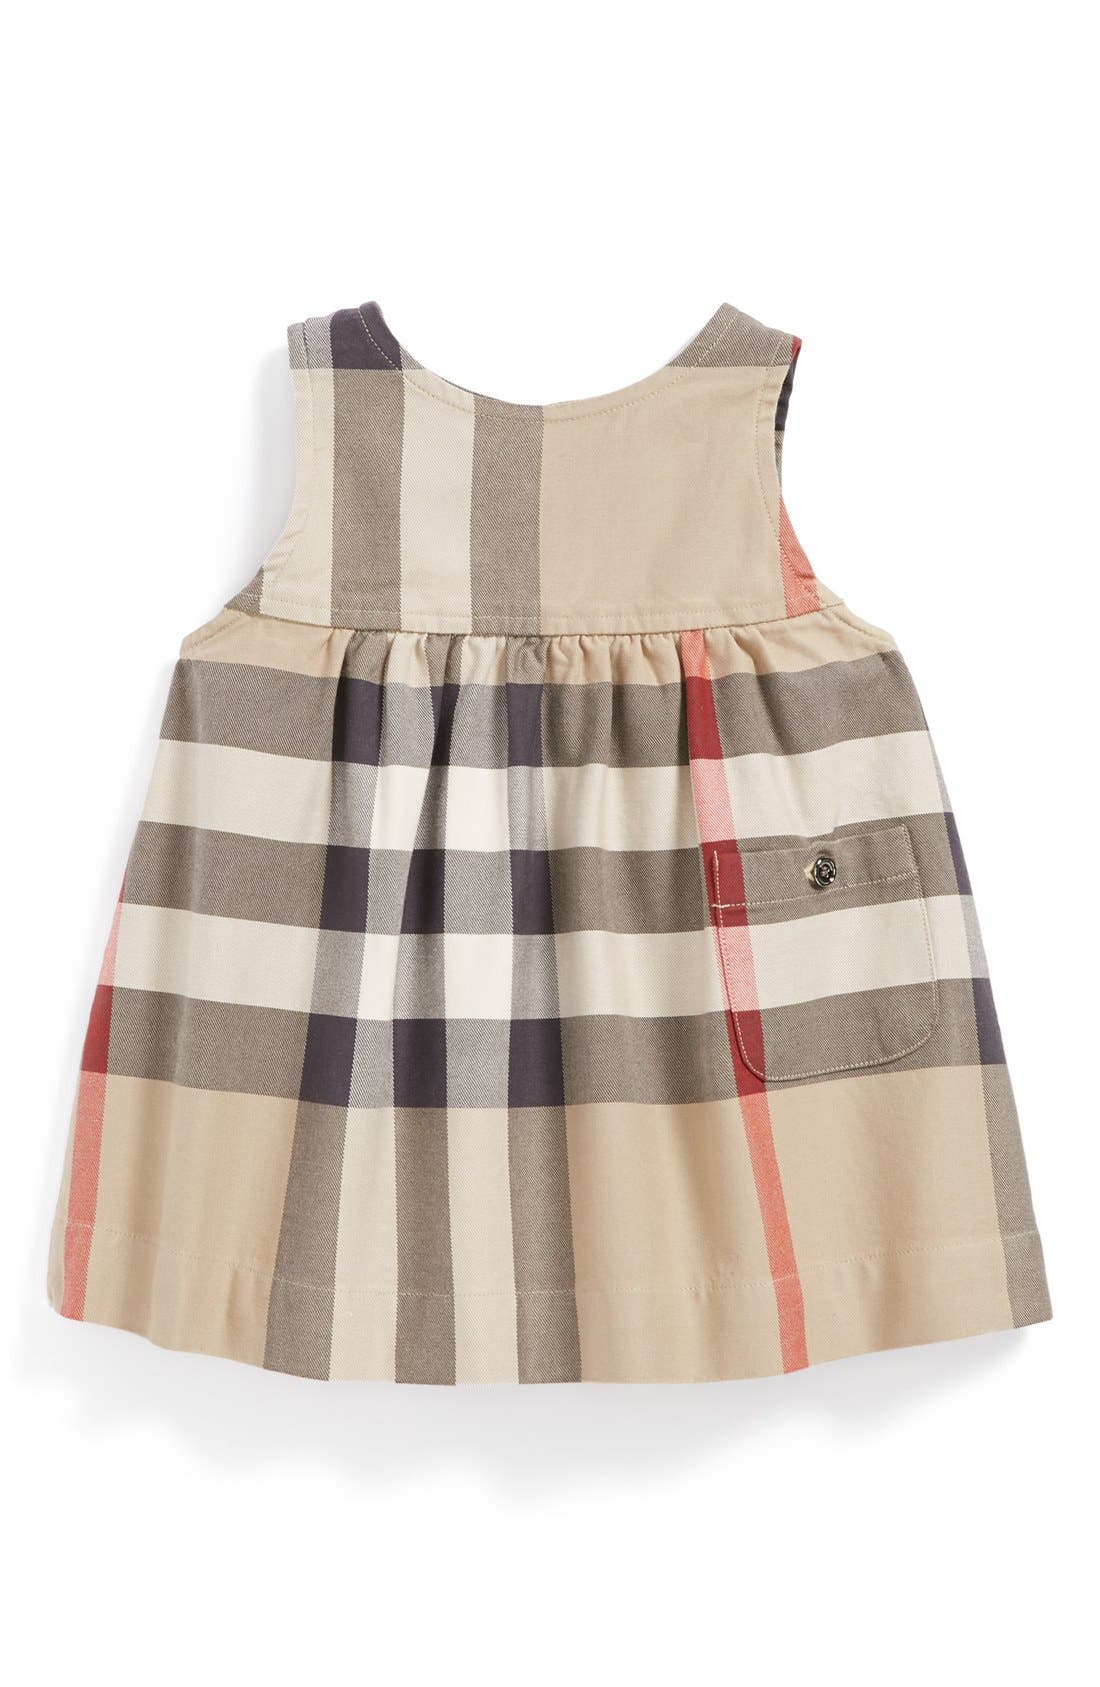 Burberry Baby Clothes Outlet Online 